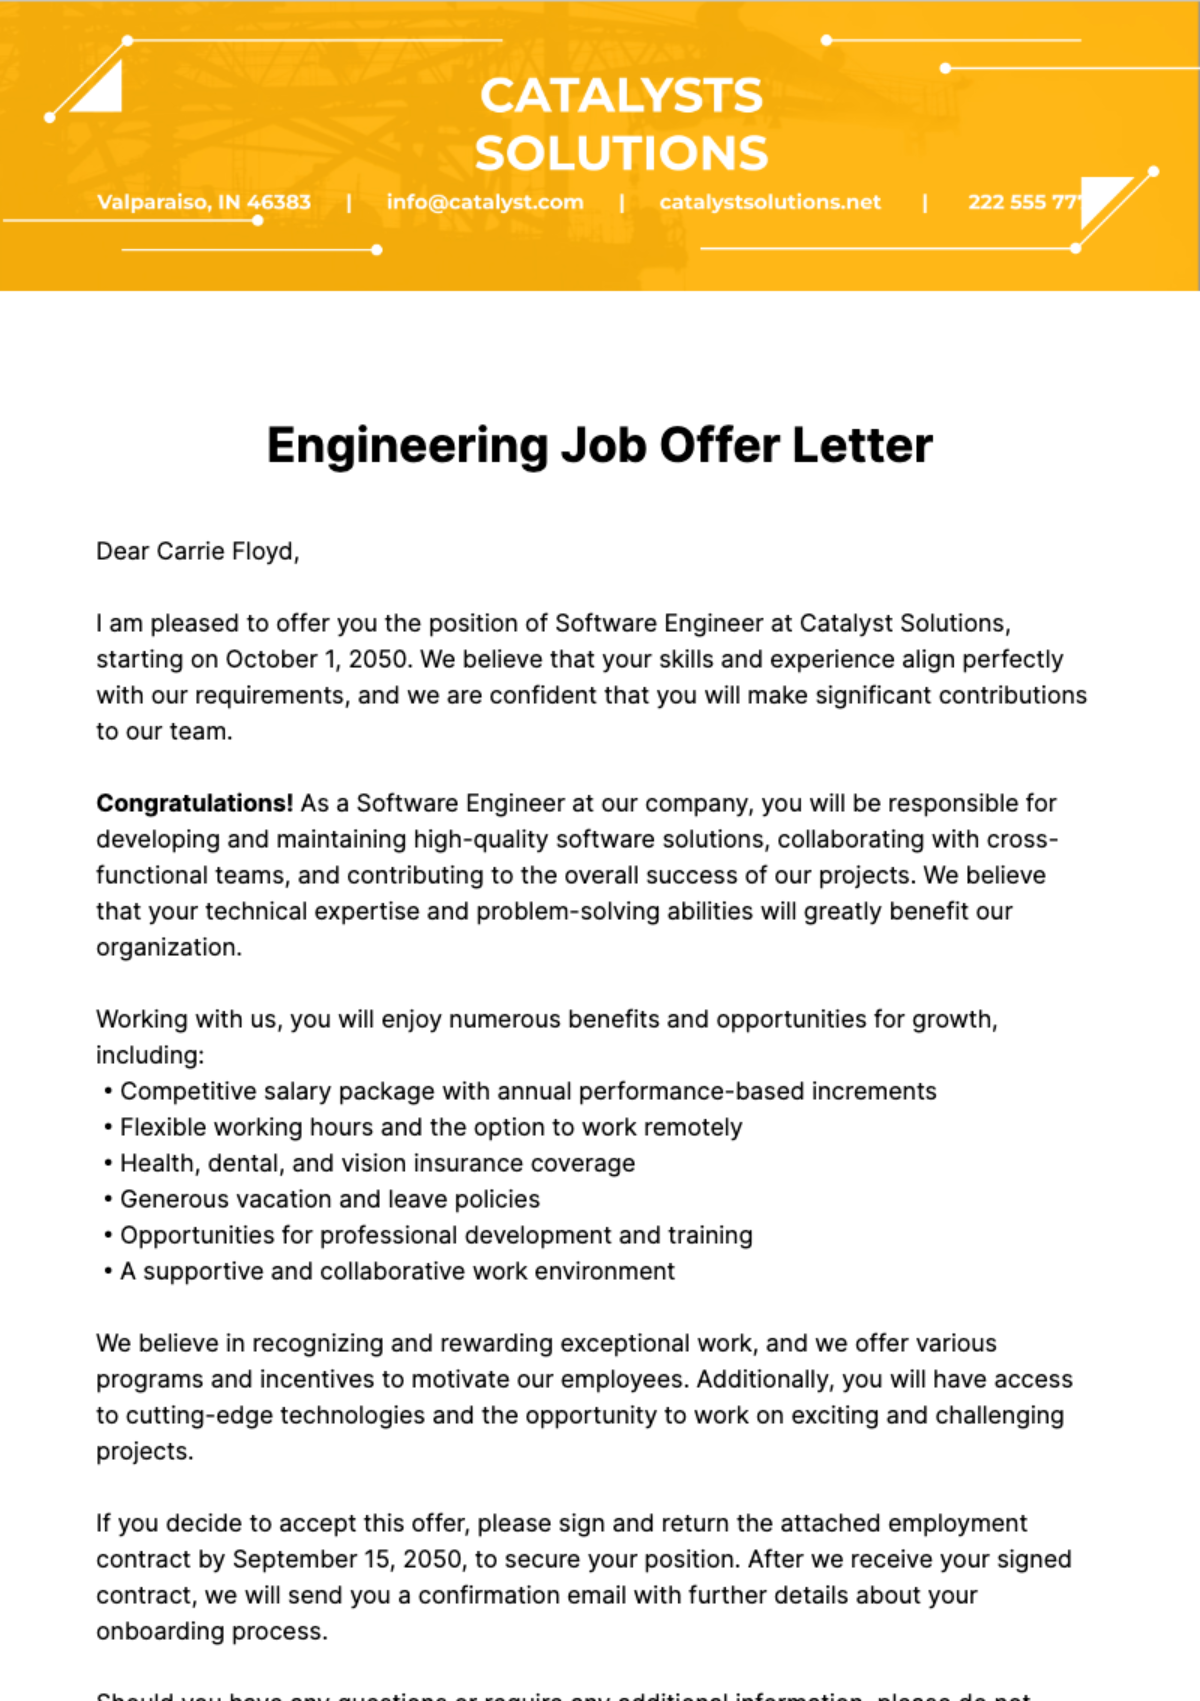 Free Engineering Job Offer Letter  Template